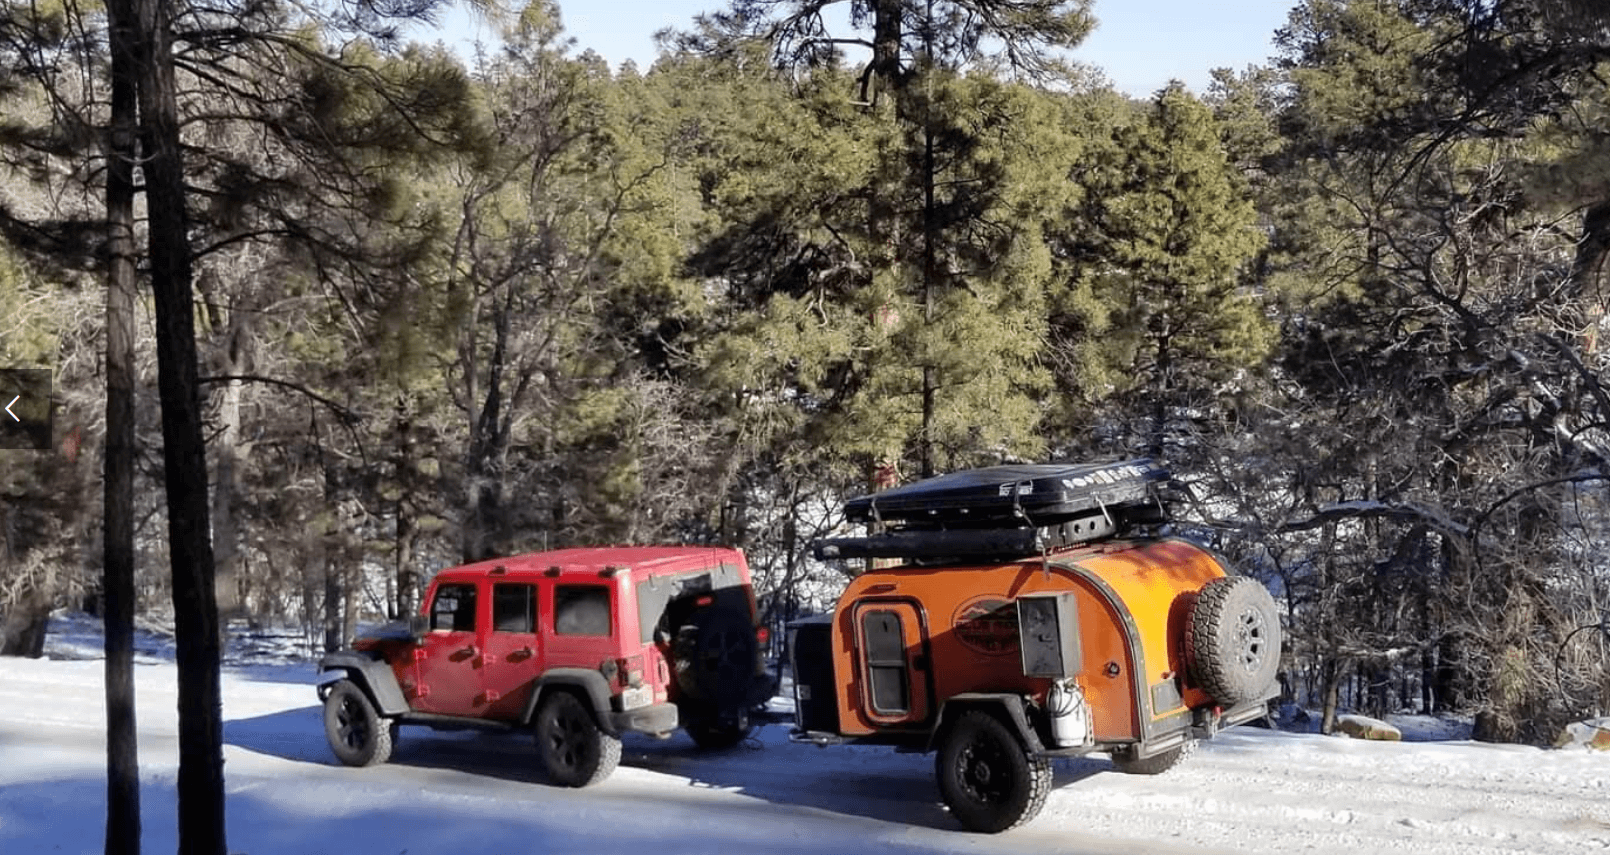 Blue Ridge X off-road camping trailer one of the best off-road camping trailers of 2022